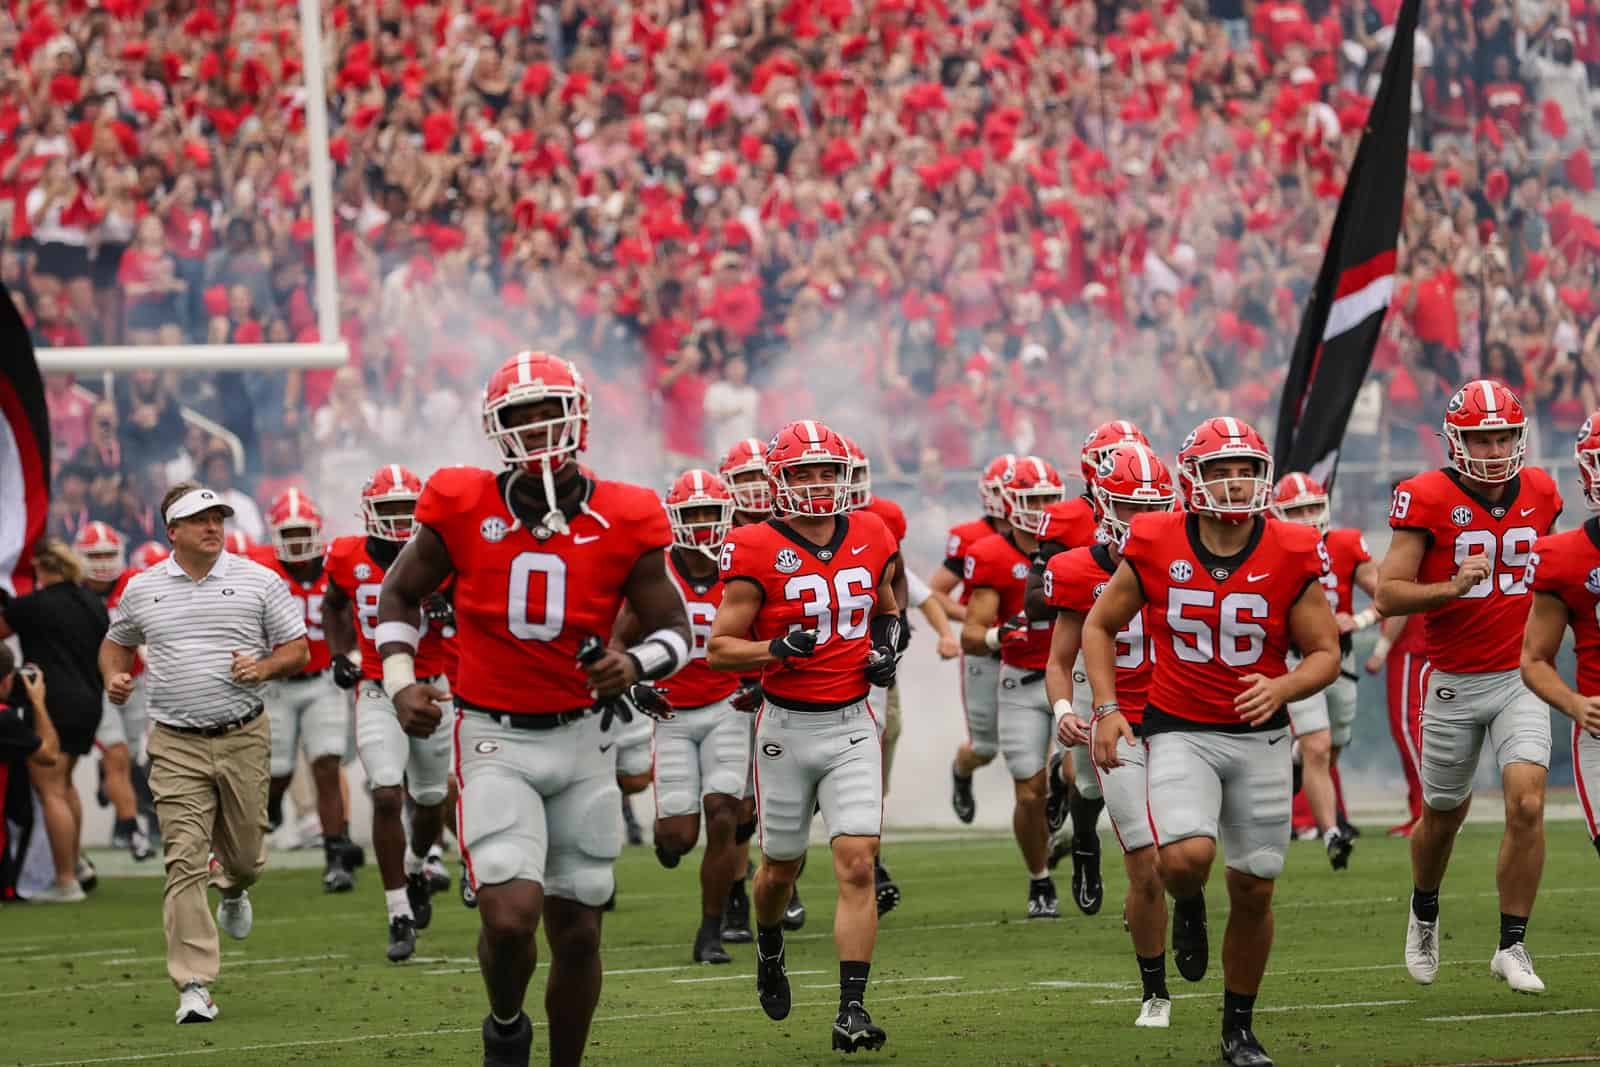 How To Watch Uga Football Today | CitizenSide